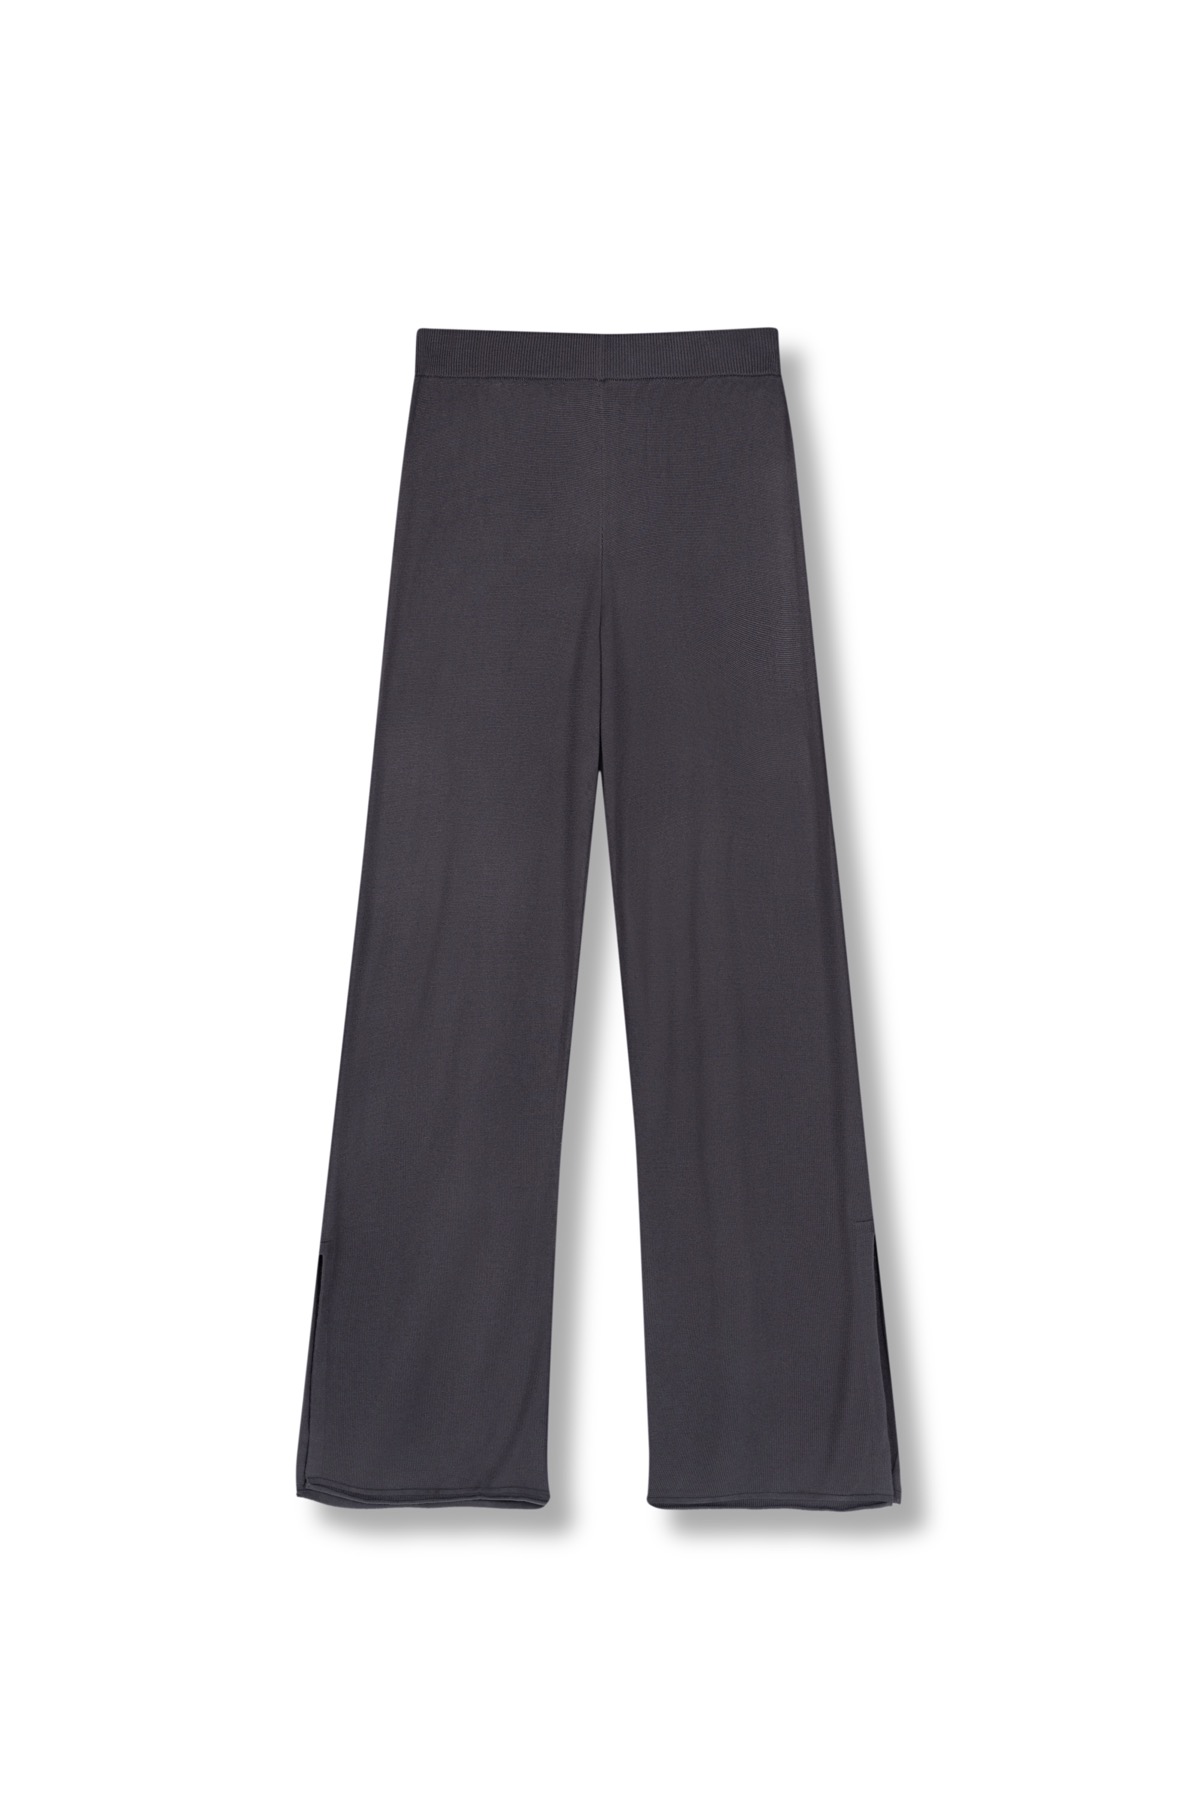 TAYLOR Flares Anthracite